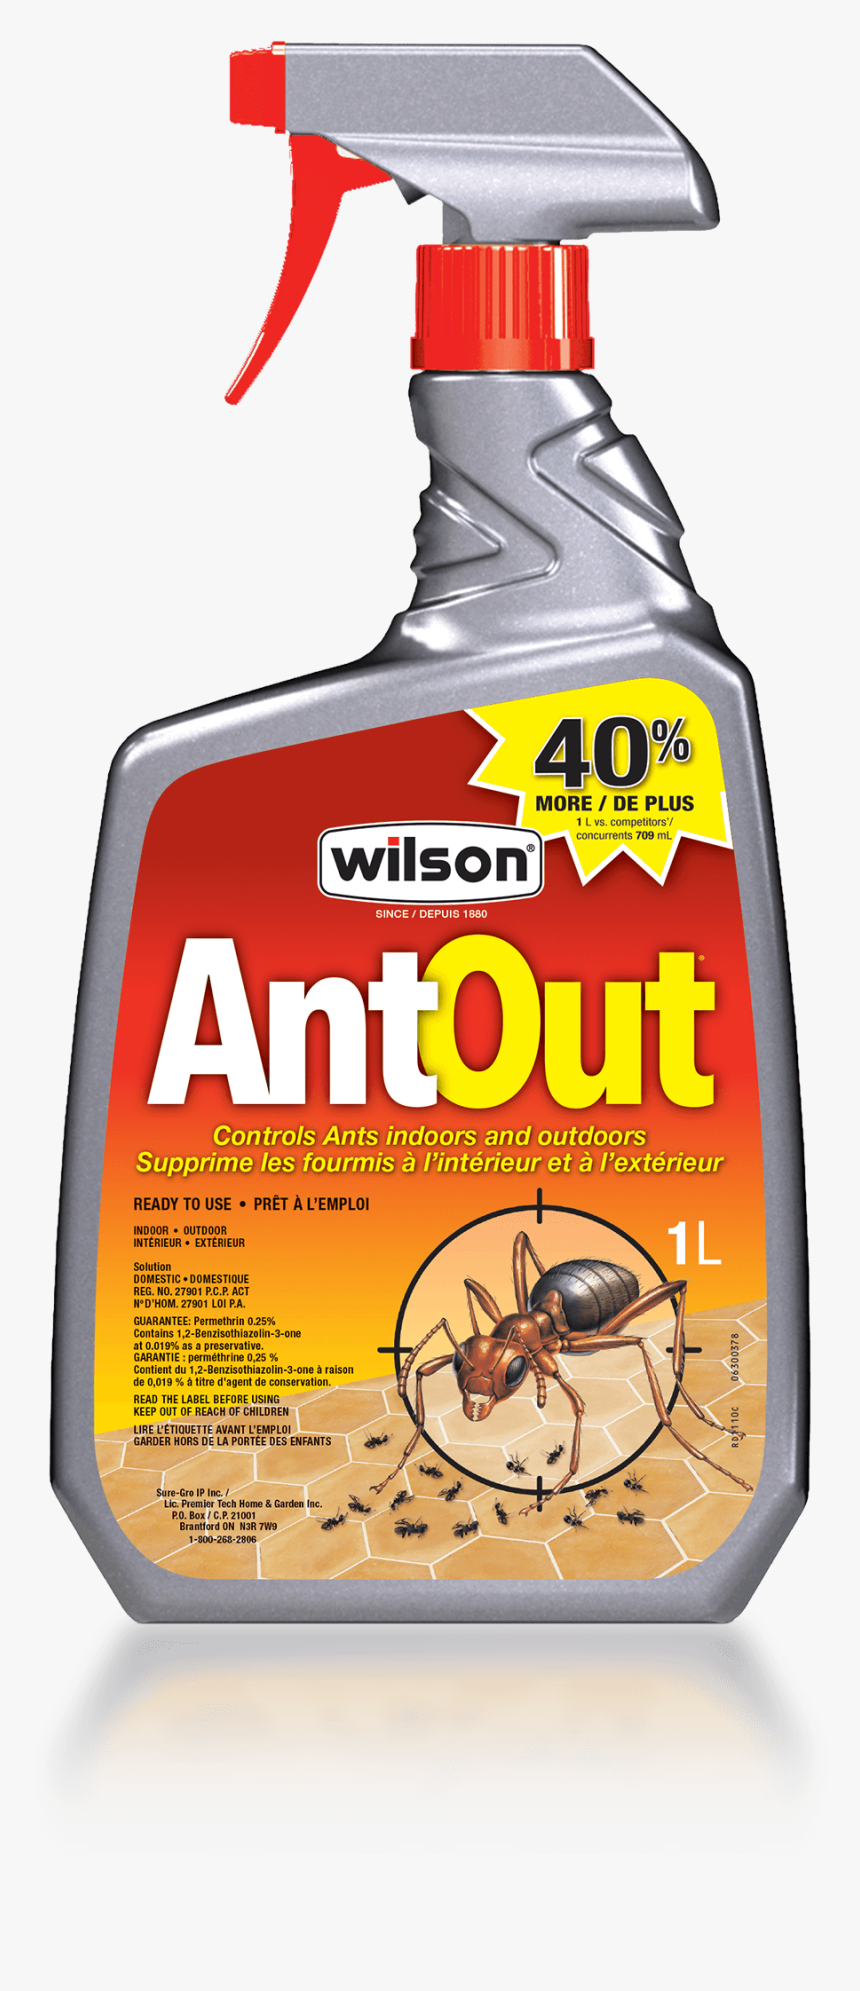 Wilson Antout - Wilson Ant Out, HD Png Download, Free Download